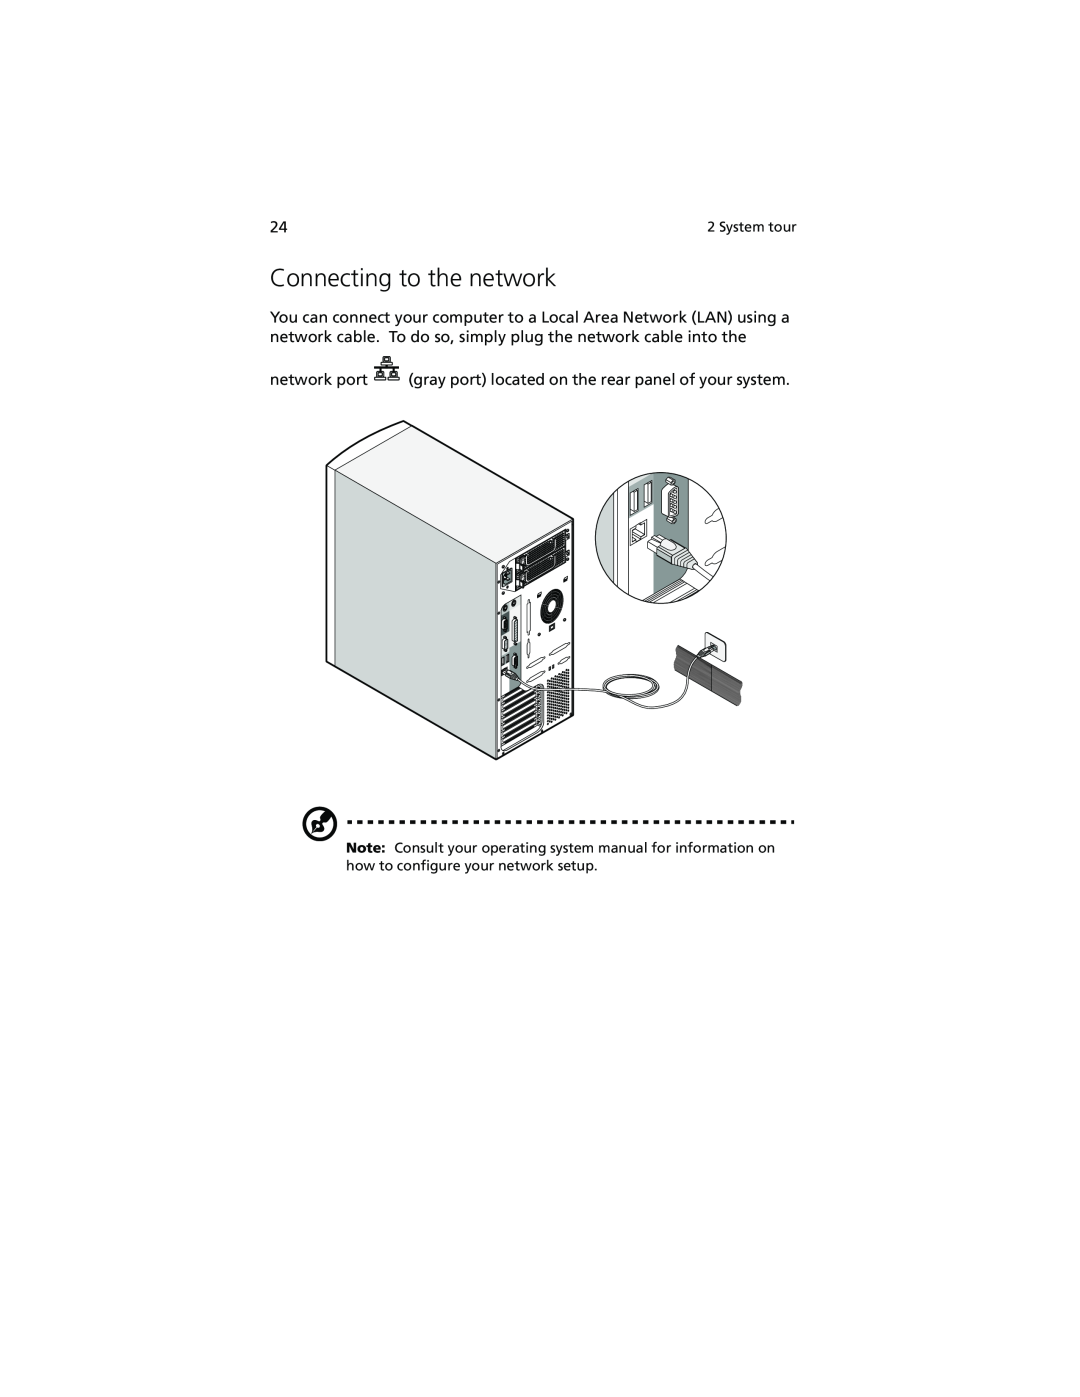 Acer Altos G610 manual Connecting to the network, network port, gray port located on the rear panel of your system 